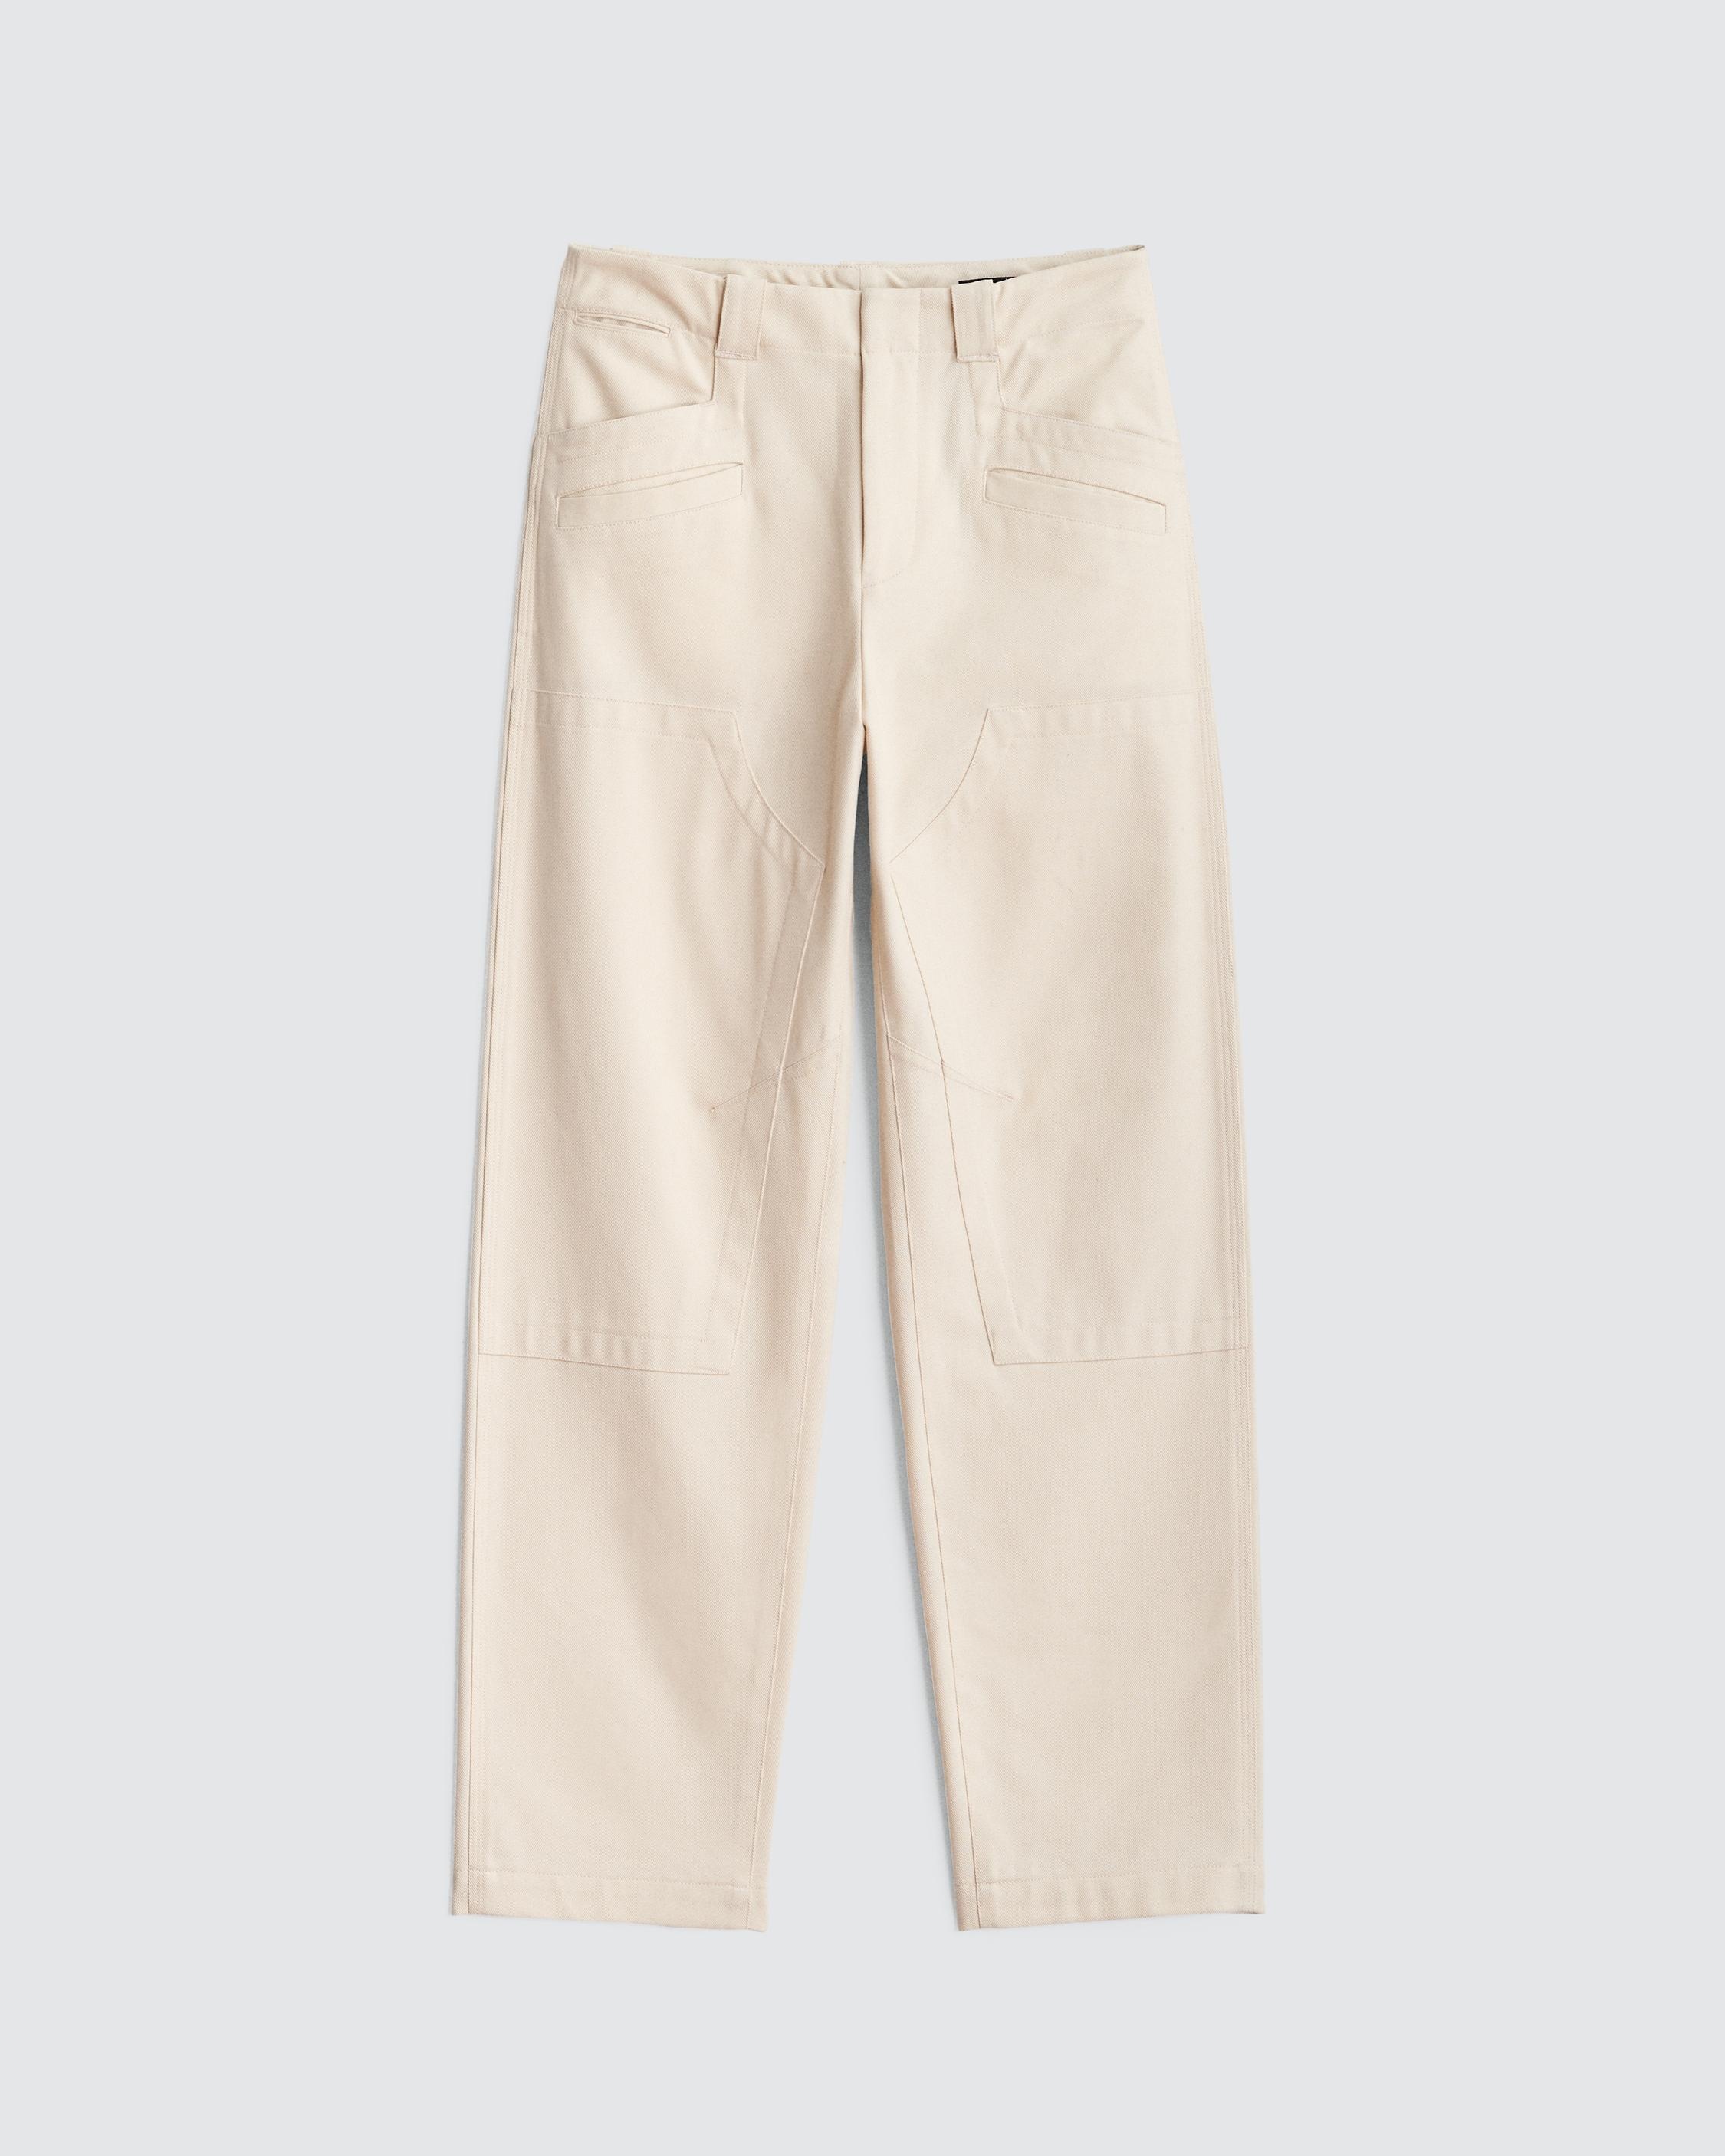 Malia Japanese Twill Cargo Pant
Relaxed Fit Pant - 1